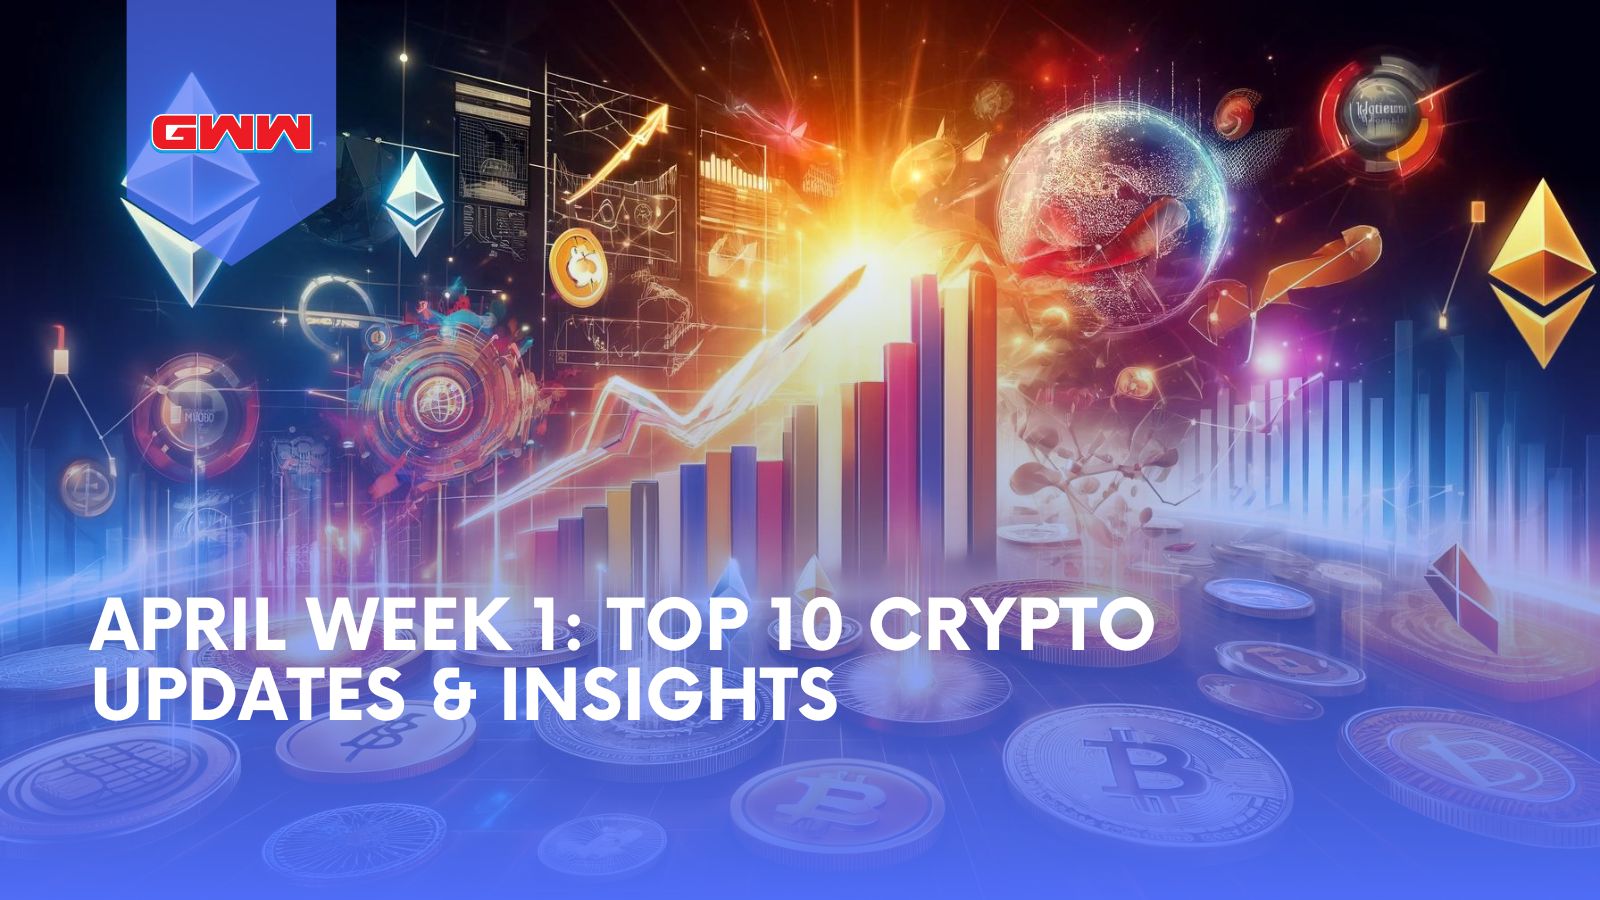 April Week 1: Top 10 Crypto Updates & Insights